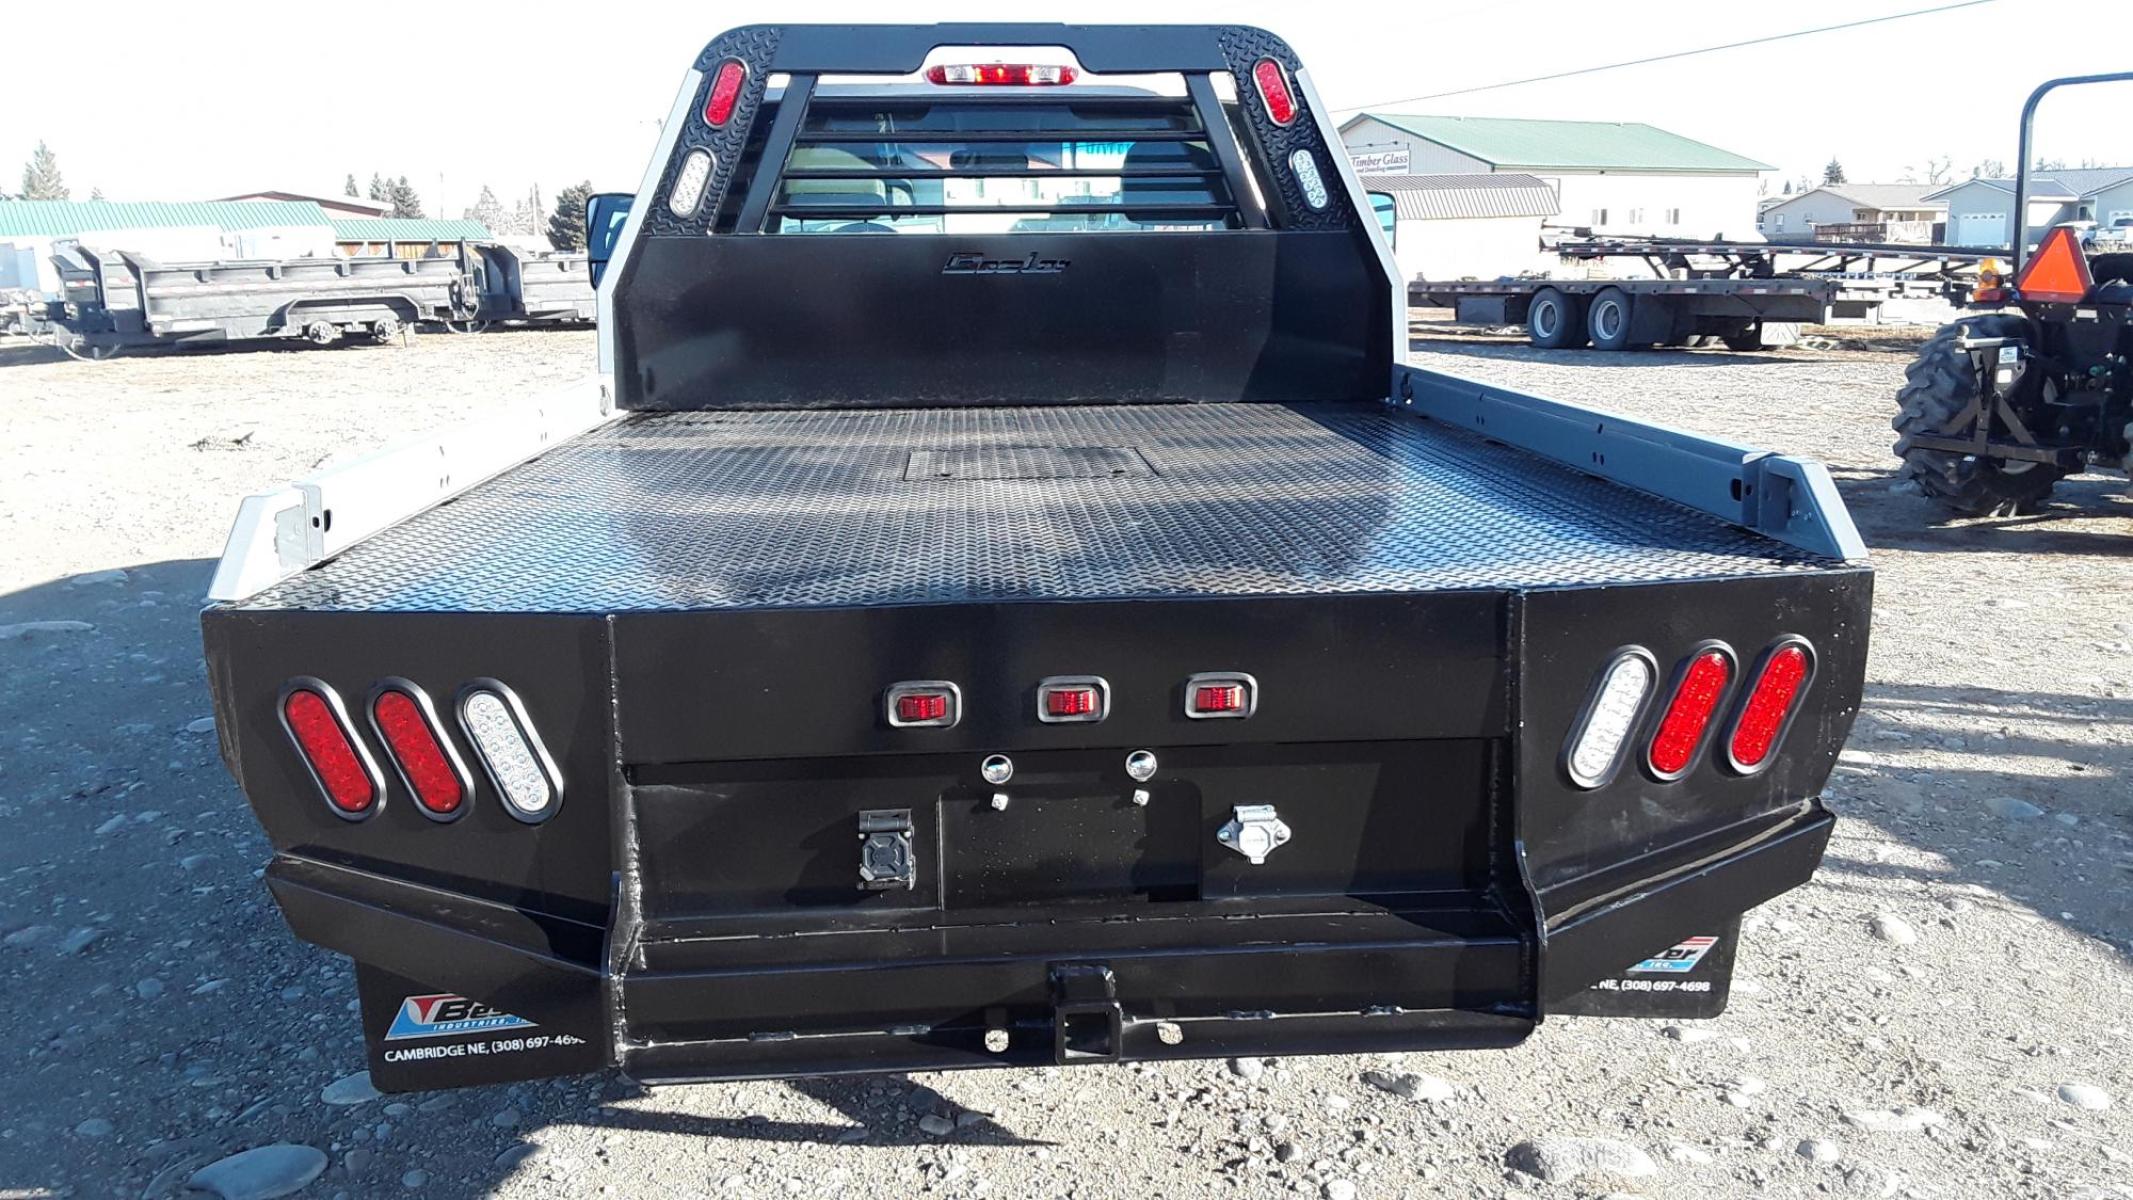 2022 Black Besler Flatbed , located at 310 West 1st Ave, Big Timber, MT, 59011, (406) 860-8510, 45.833511, -109.957809 - ALL NEW BESLER 6000 SERIES FLATBED, GN HITCH W- 30K TOW BALL, REAR RECEIVER HITCH, 7 ROUND TRAILER PLUGS, LED LIGHTS, STAKE POCKETS-RUB RAIL, TAPERED REAR. 7 X 7 FOR SHORT WHEEL BASE PU - $4,295.00. 7 X 81-2 FOR LONG WHEEL BASE PU - $4,295.00.	FOLD DOWN SIDES - ADD $200.00. INSTALLATION AVAIL - Photo #2